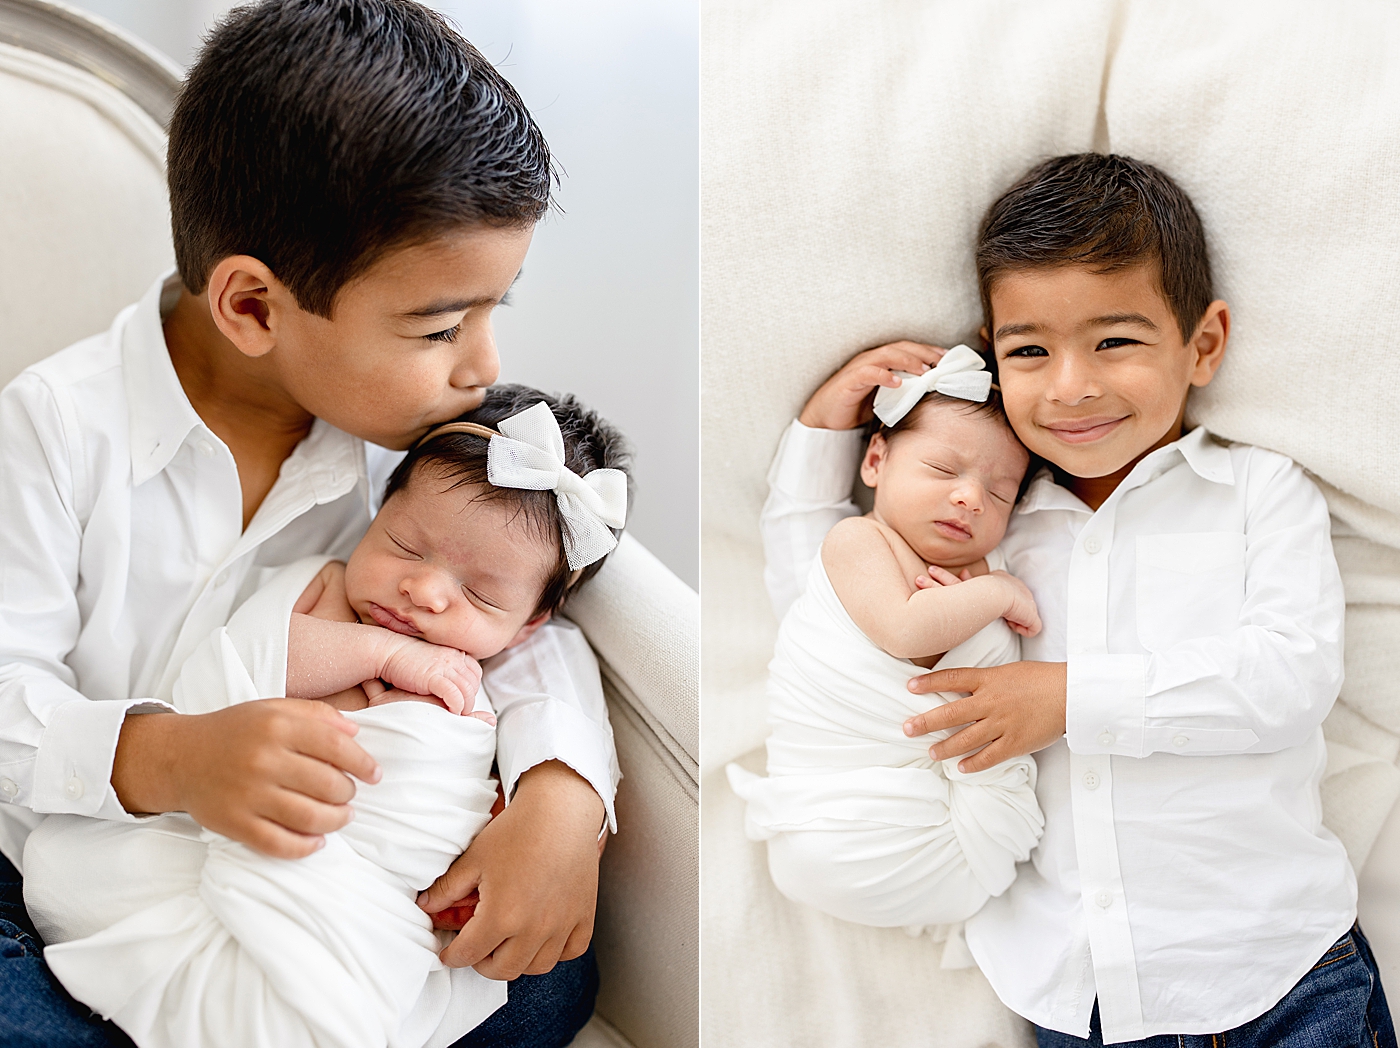 Big brother and baby sister. Photo by Brittany Elise Photography.